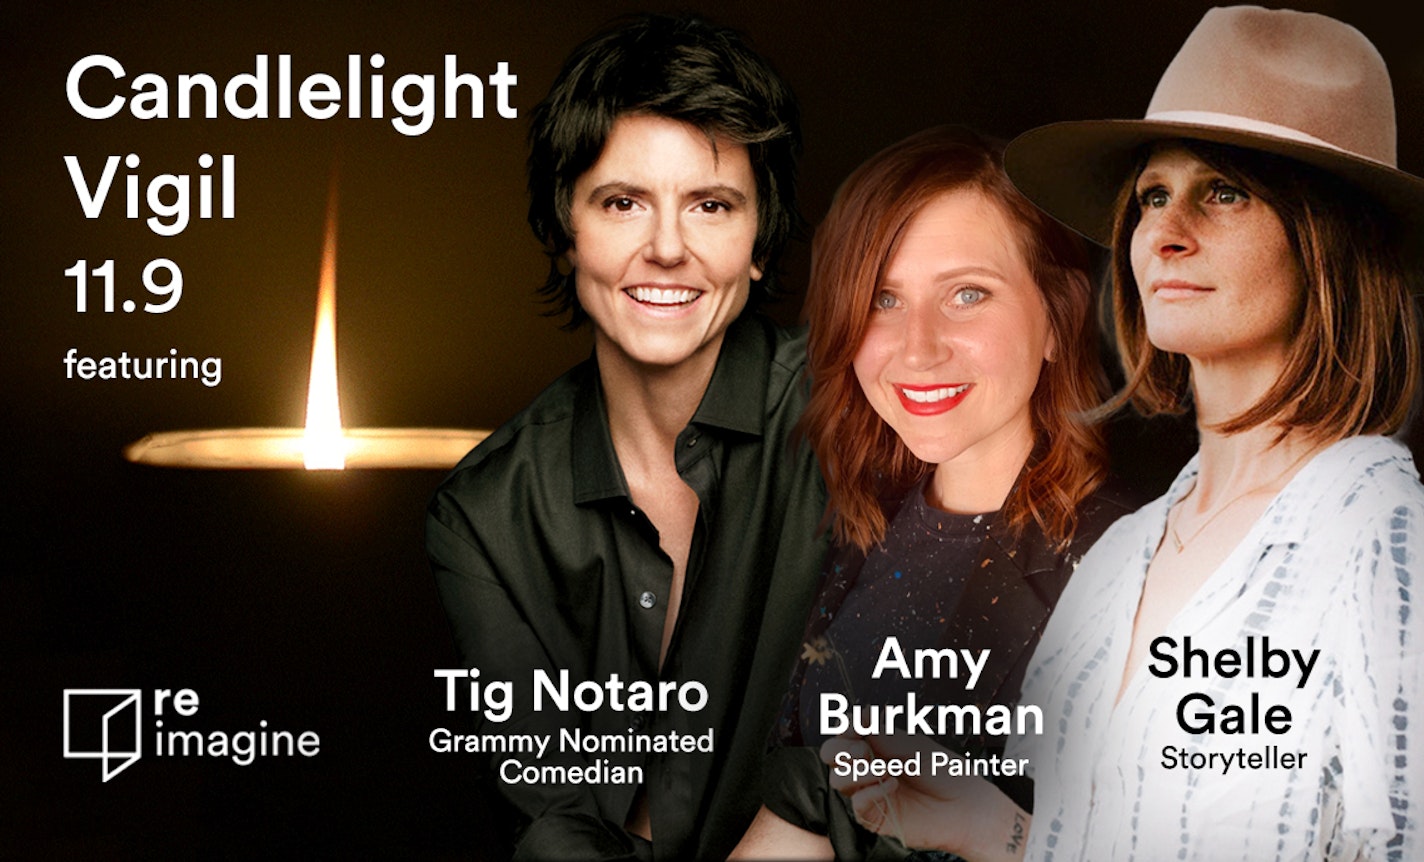 Virtual Candlelight Vigil with Tig Notaro, Amy Burkman, & Shelby Gale